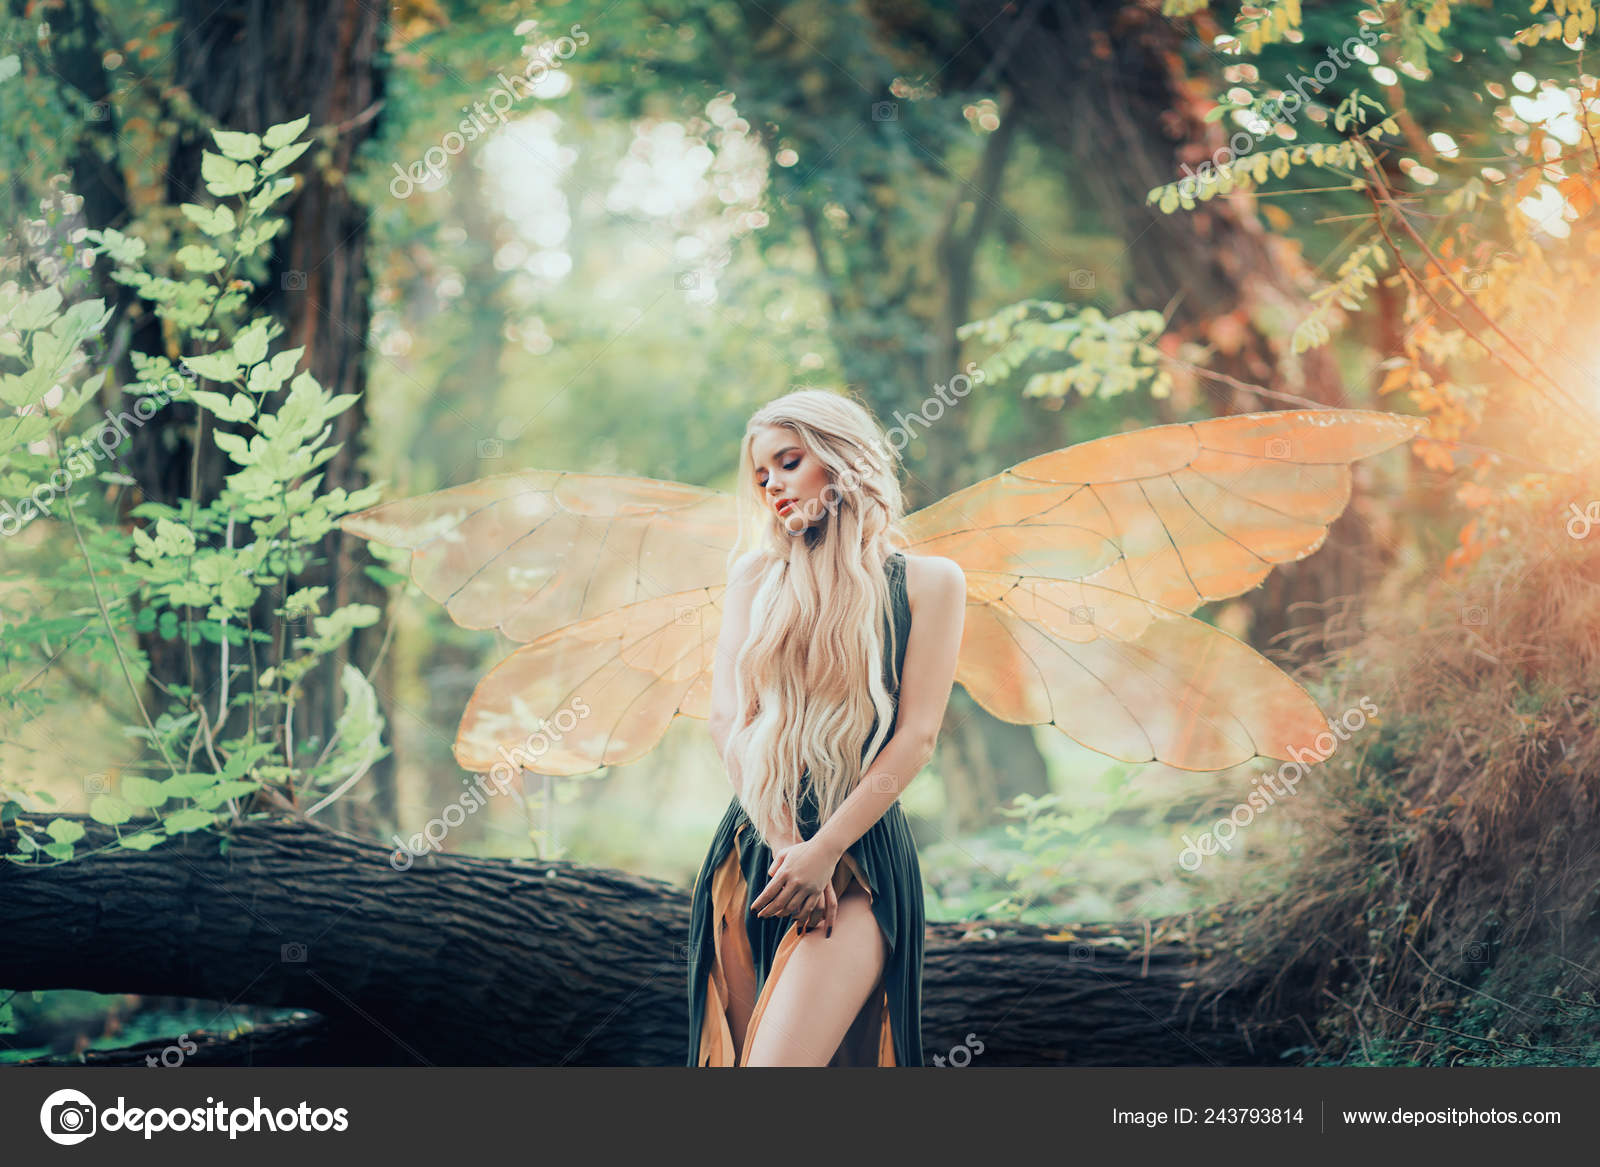 Real fairy from magical stories, goddess of nature with ...